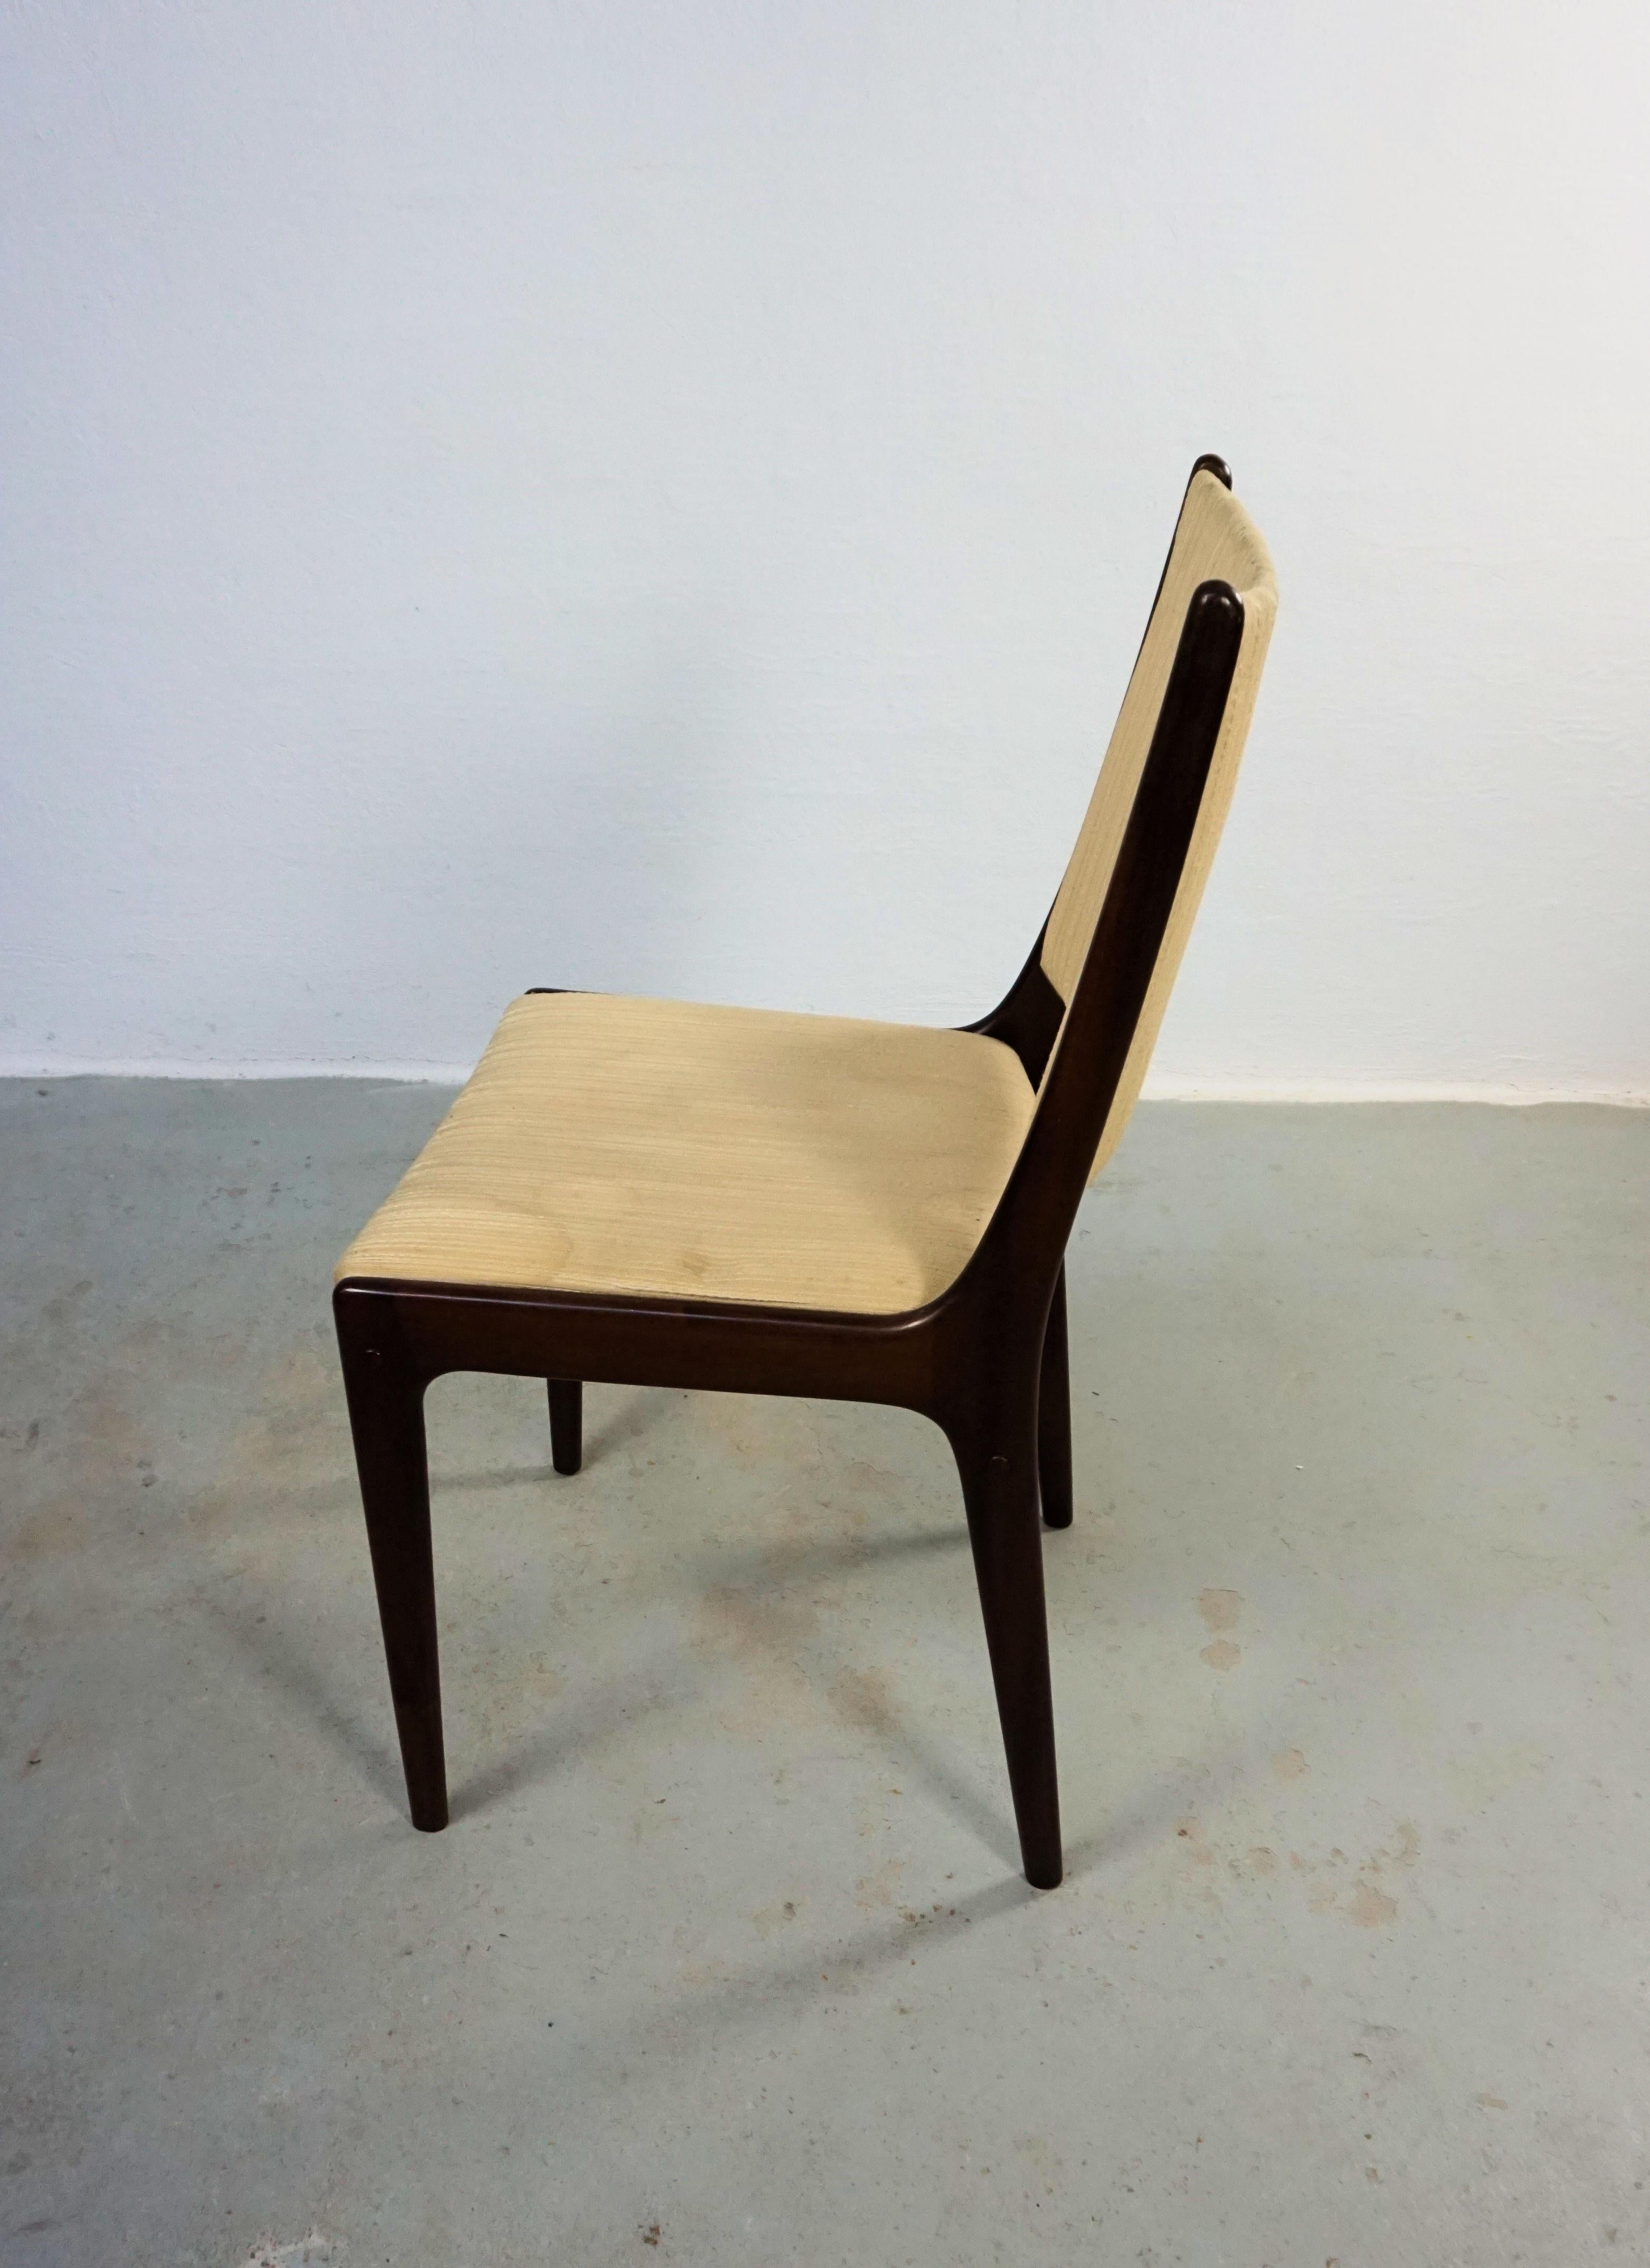 Eight Restored Johannes Andersen Mahogany Dining Chairs IncludeCustom Upholstery In Good Condition For Sale In Knebel, DK